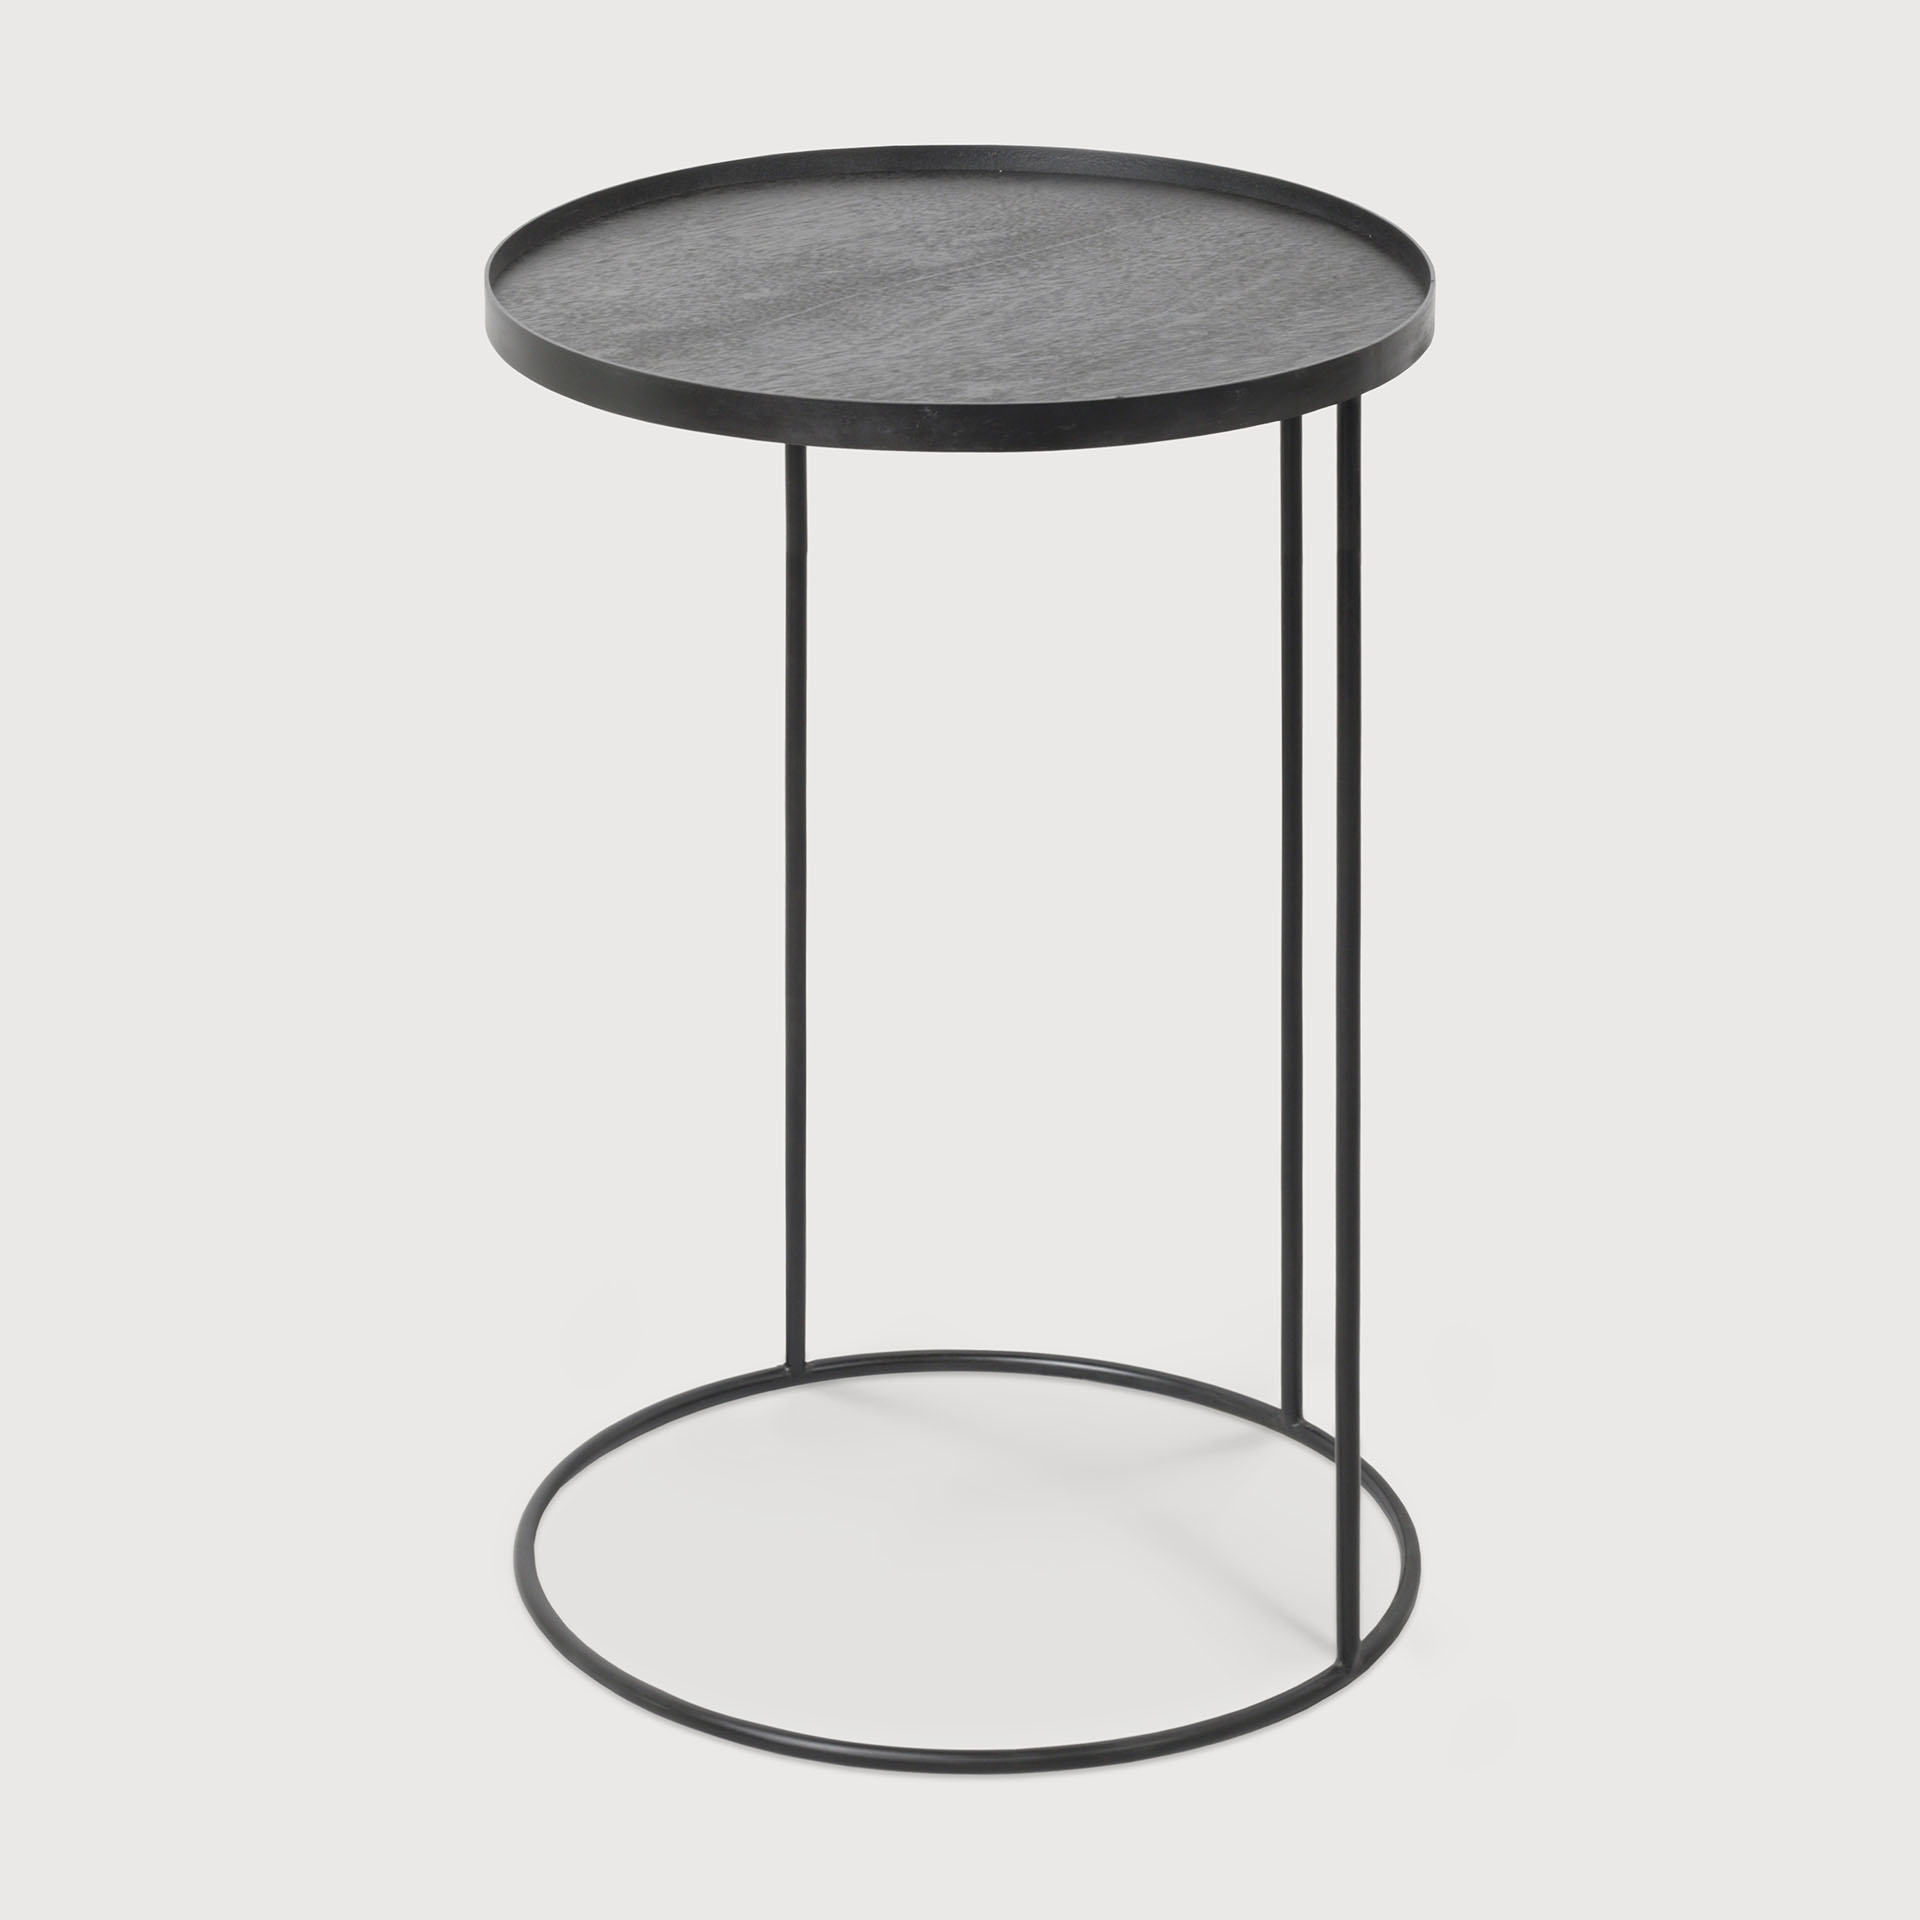 [20704*] Round tray side table (49x49x66cm)